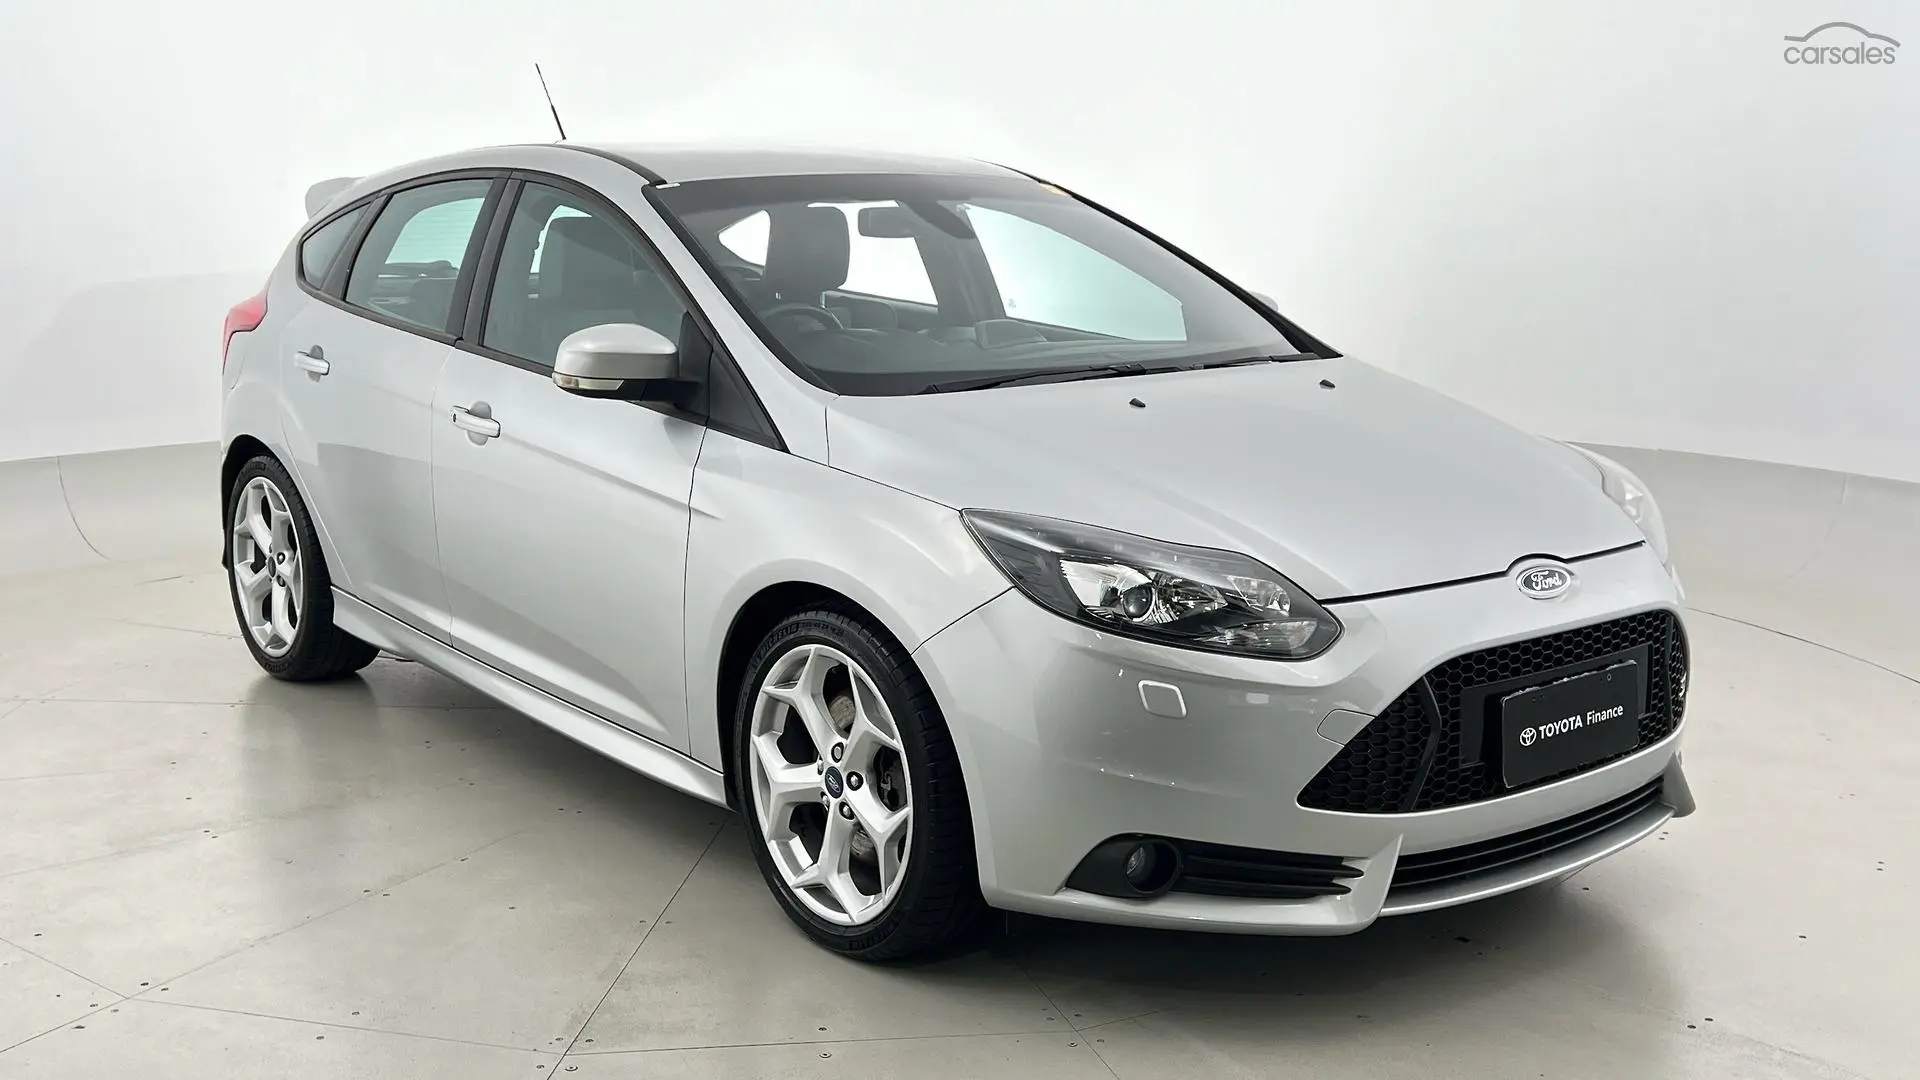 2013 Ford Focus Image 1